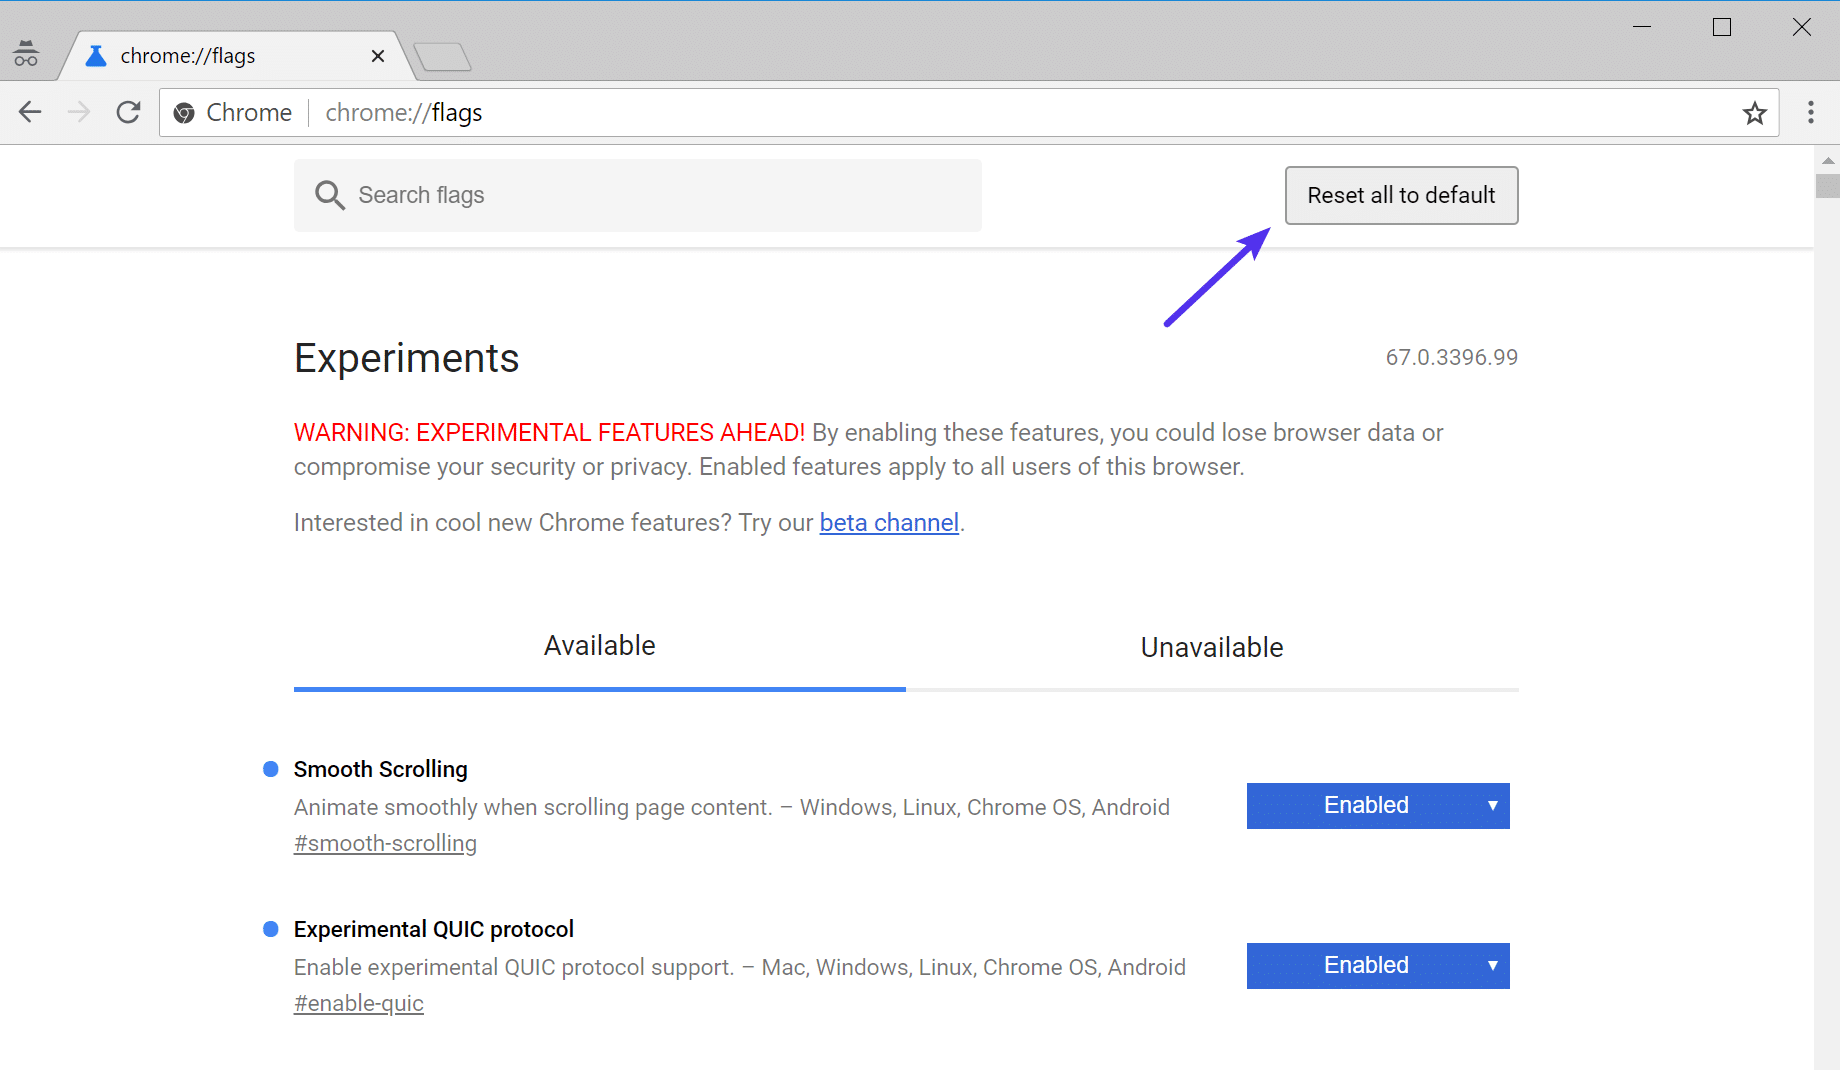 Reset all to default button in Chrome flags